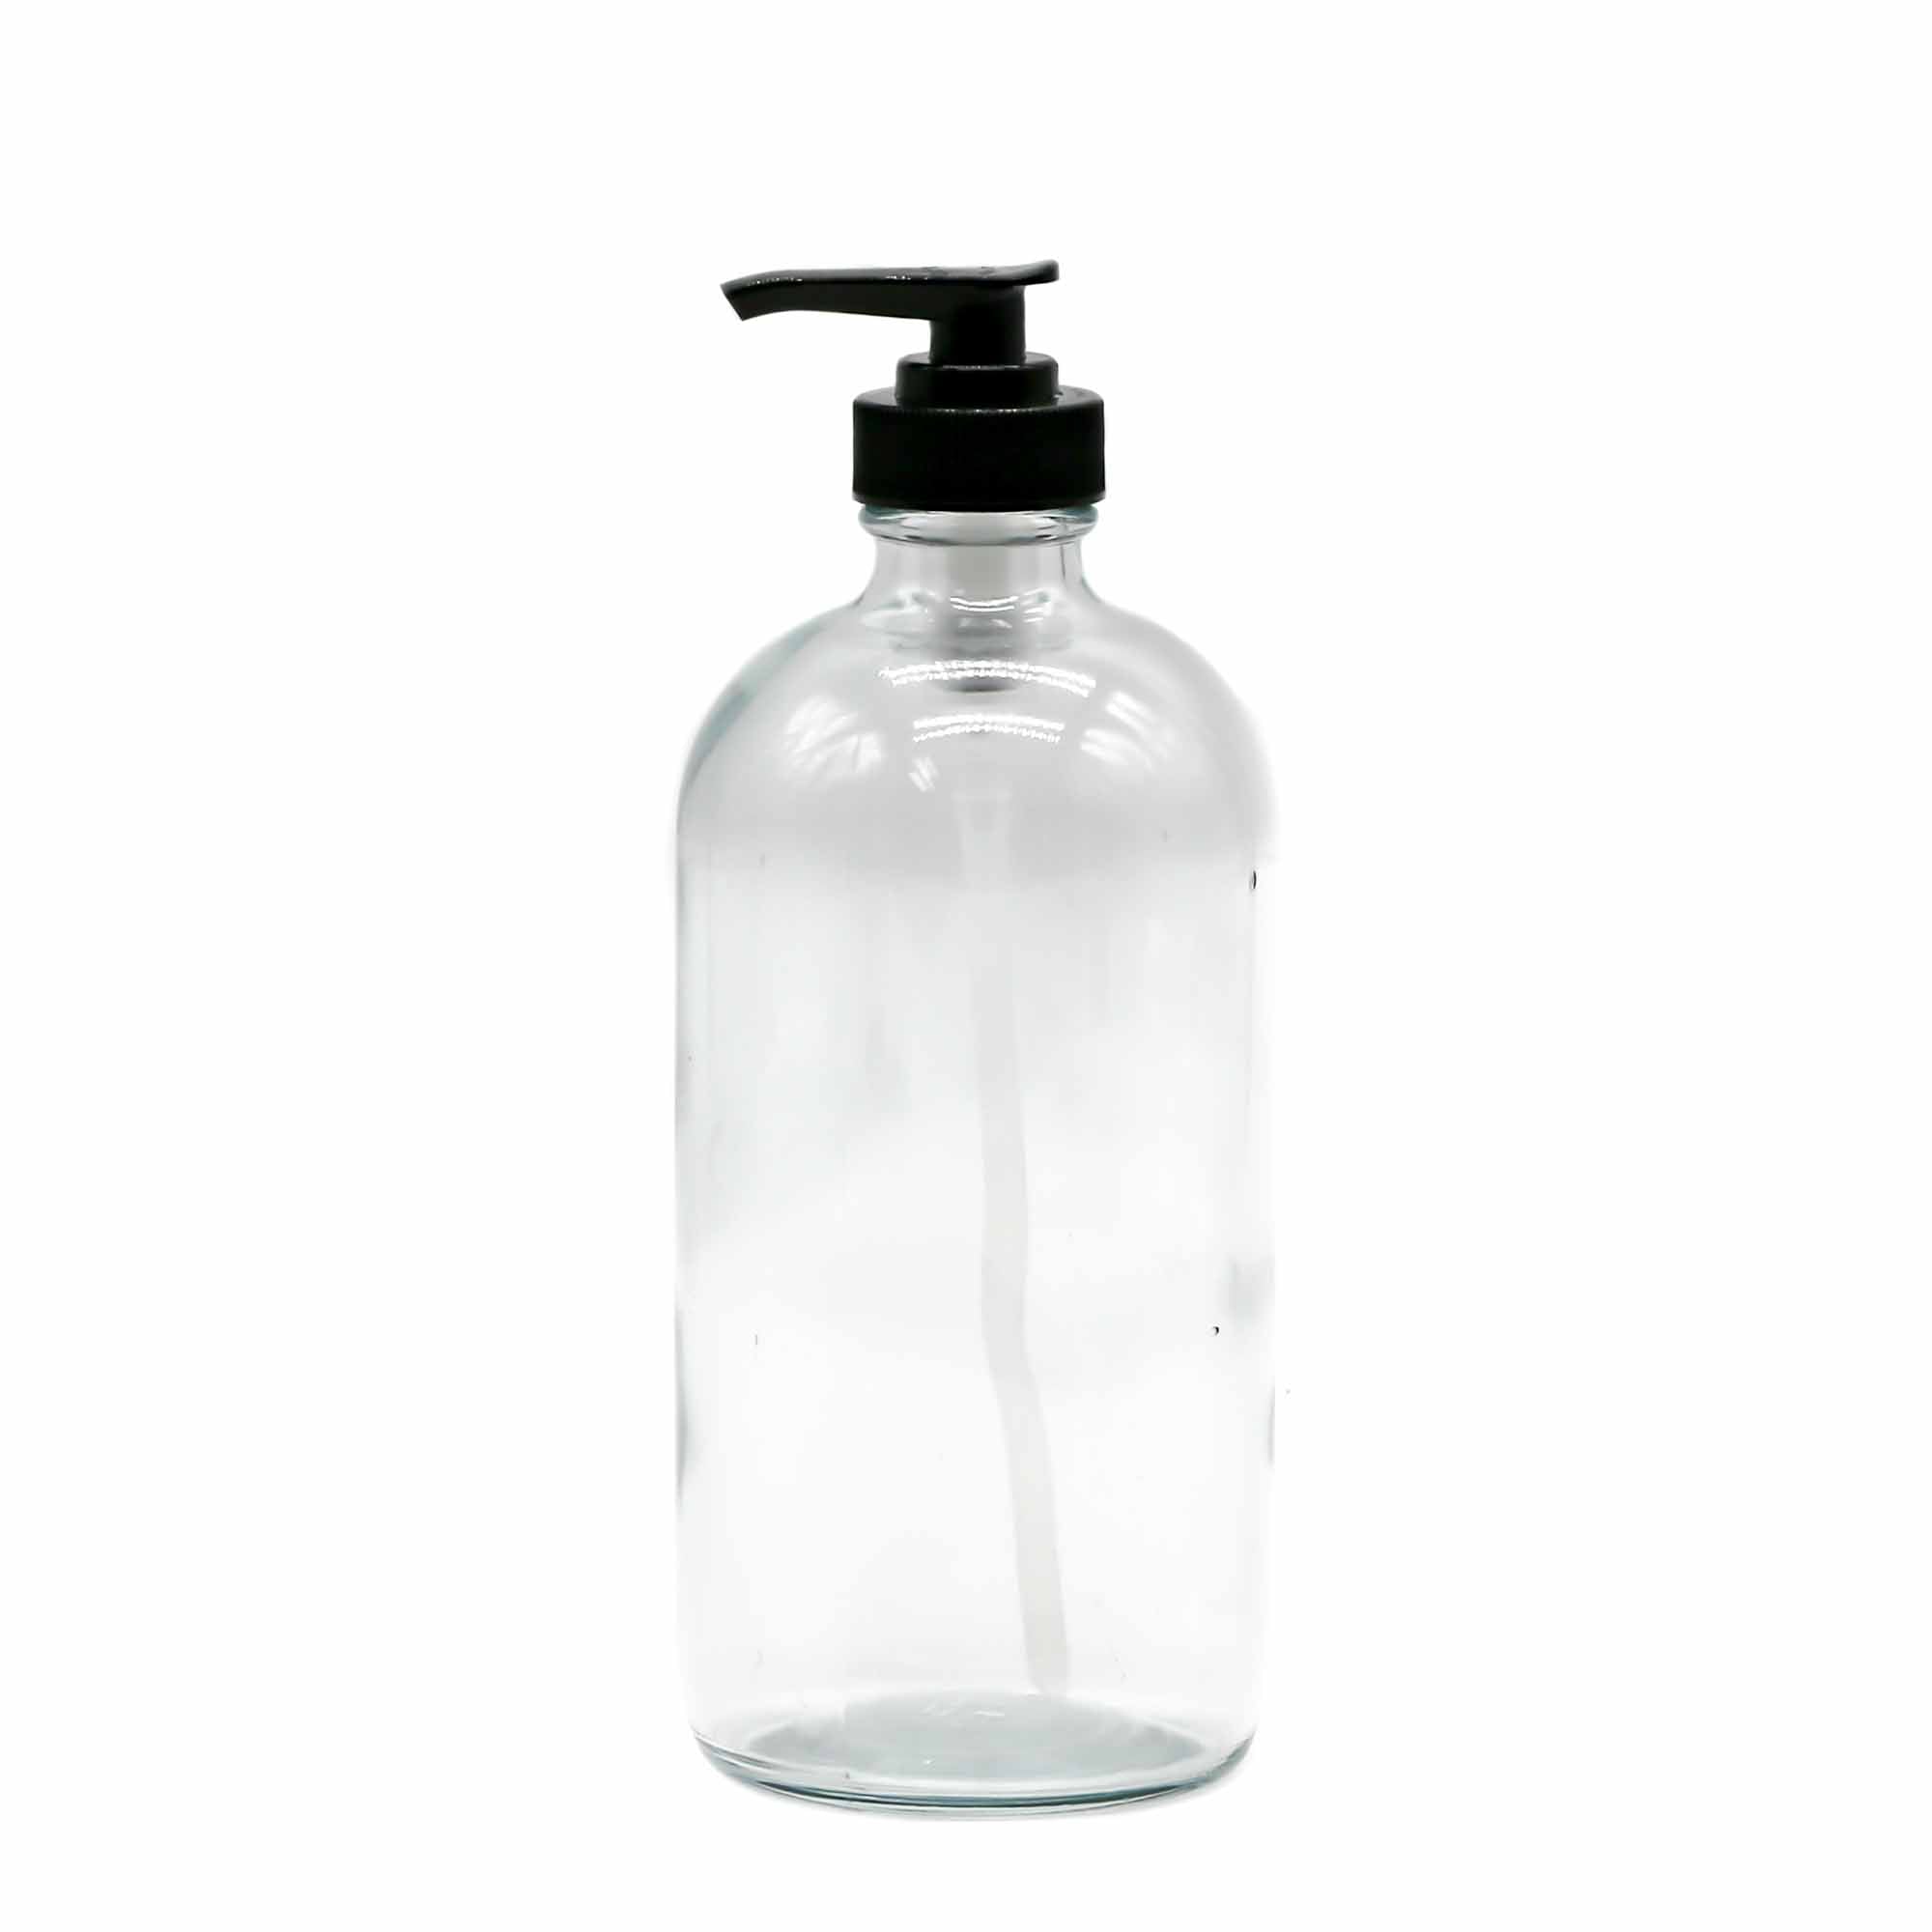 Clear Glass Bottle with Pump - Mortise And Tenon